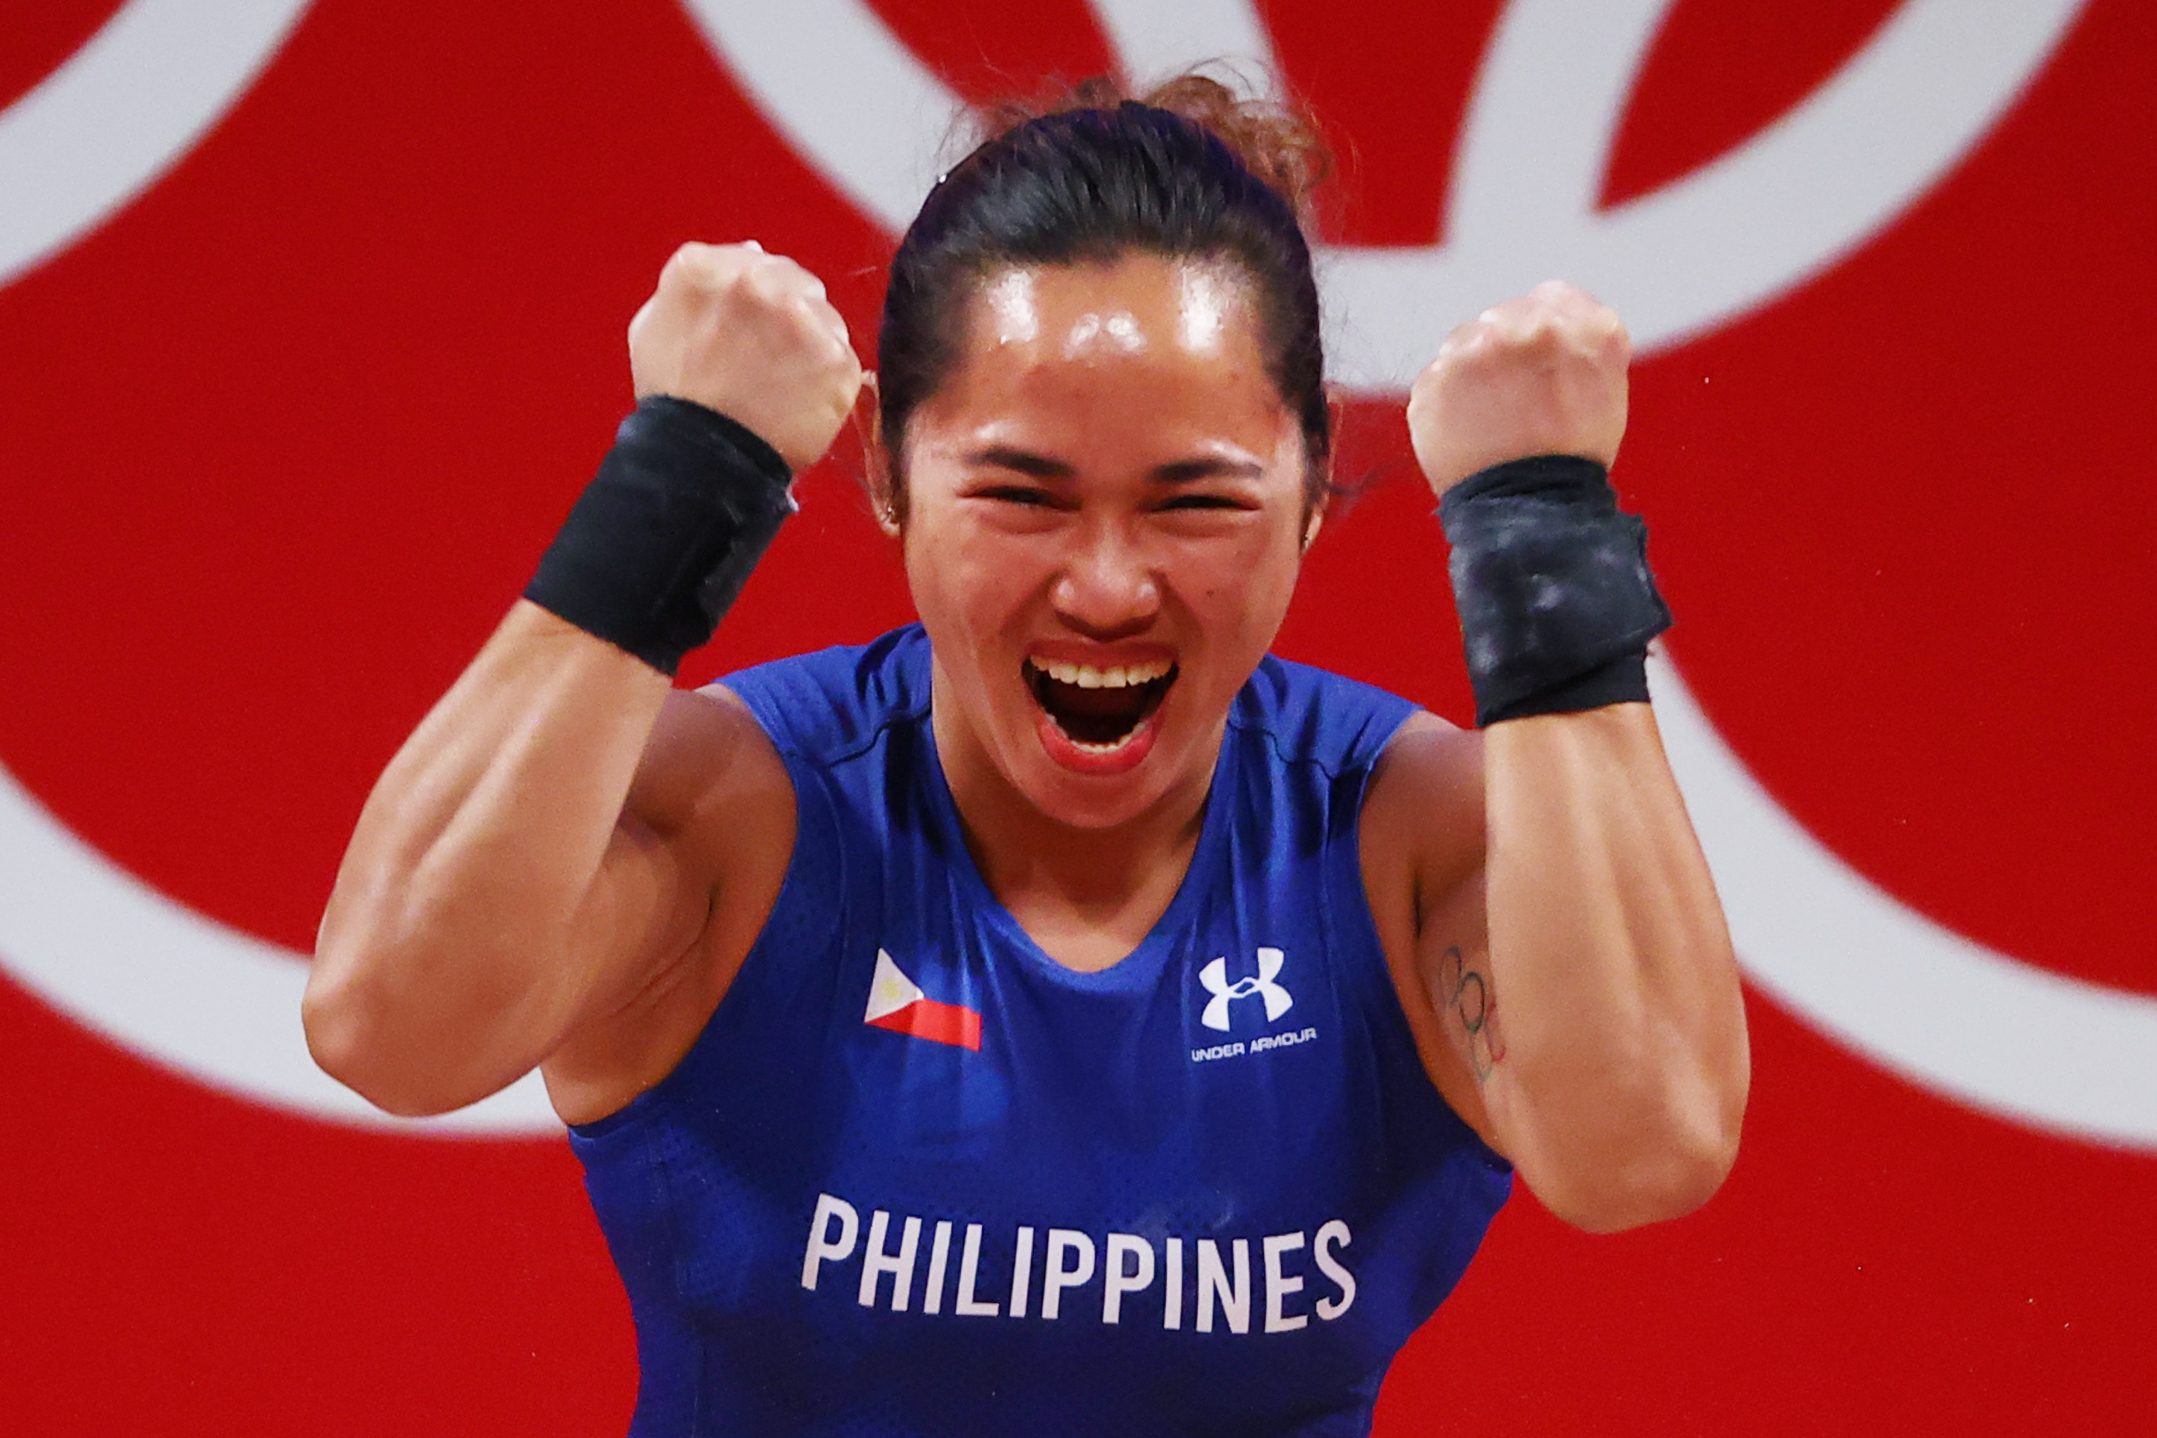 LIST: Hidilyn Diaz rakes in millions after historic Olympic gold